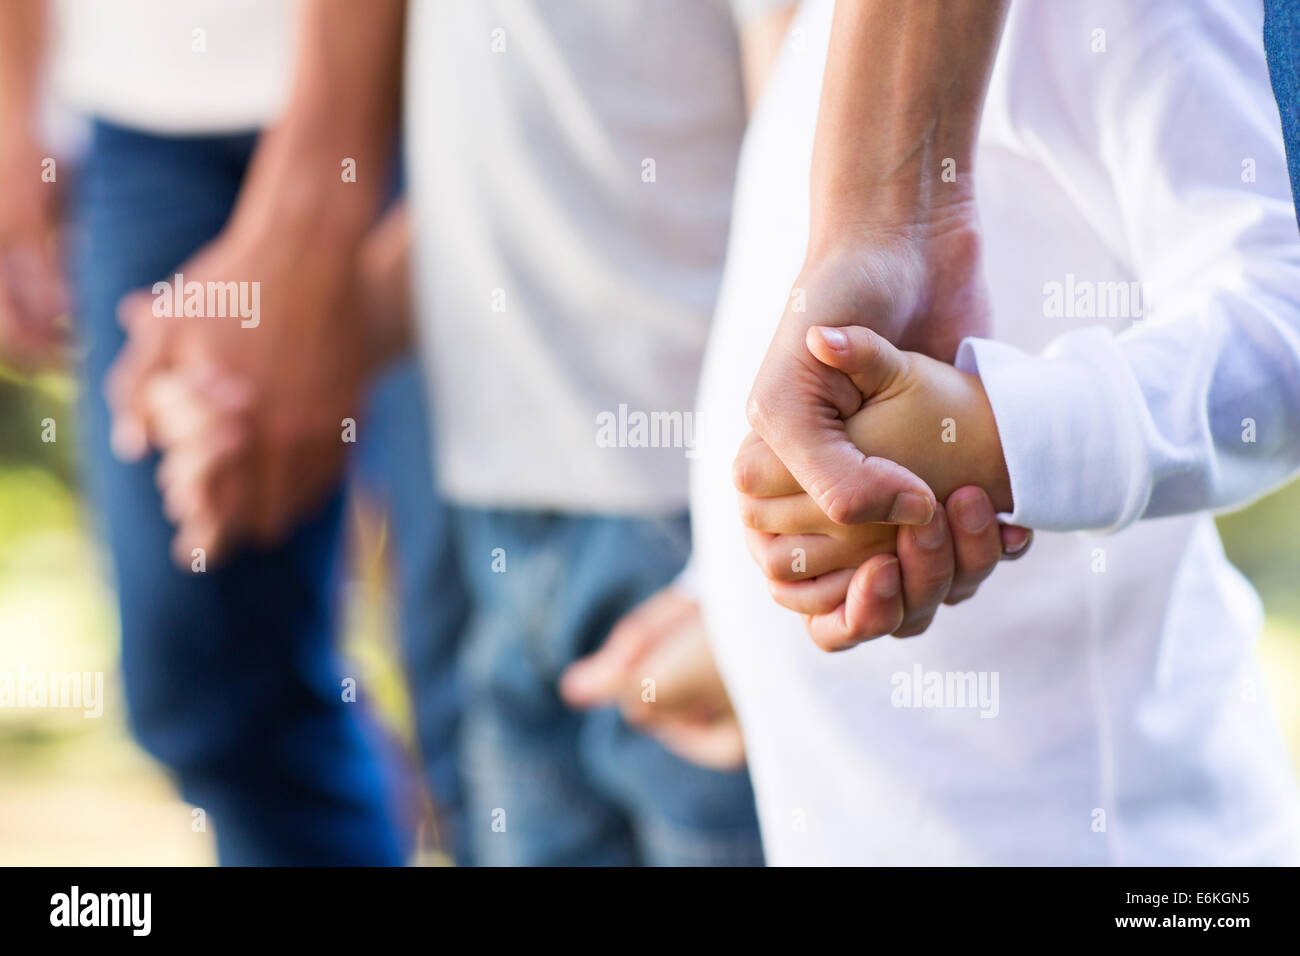 family holding hands close up Stock Photo